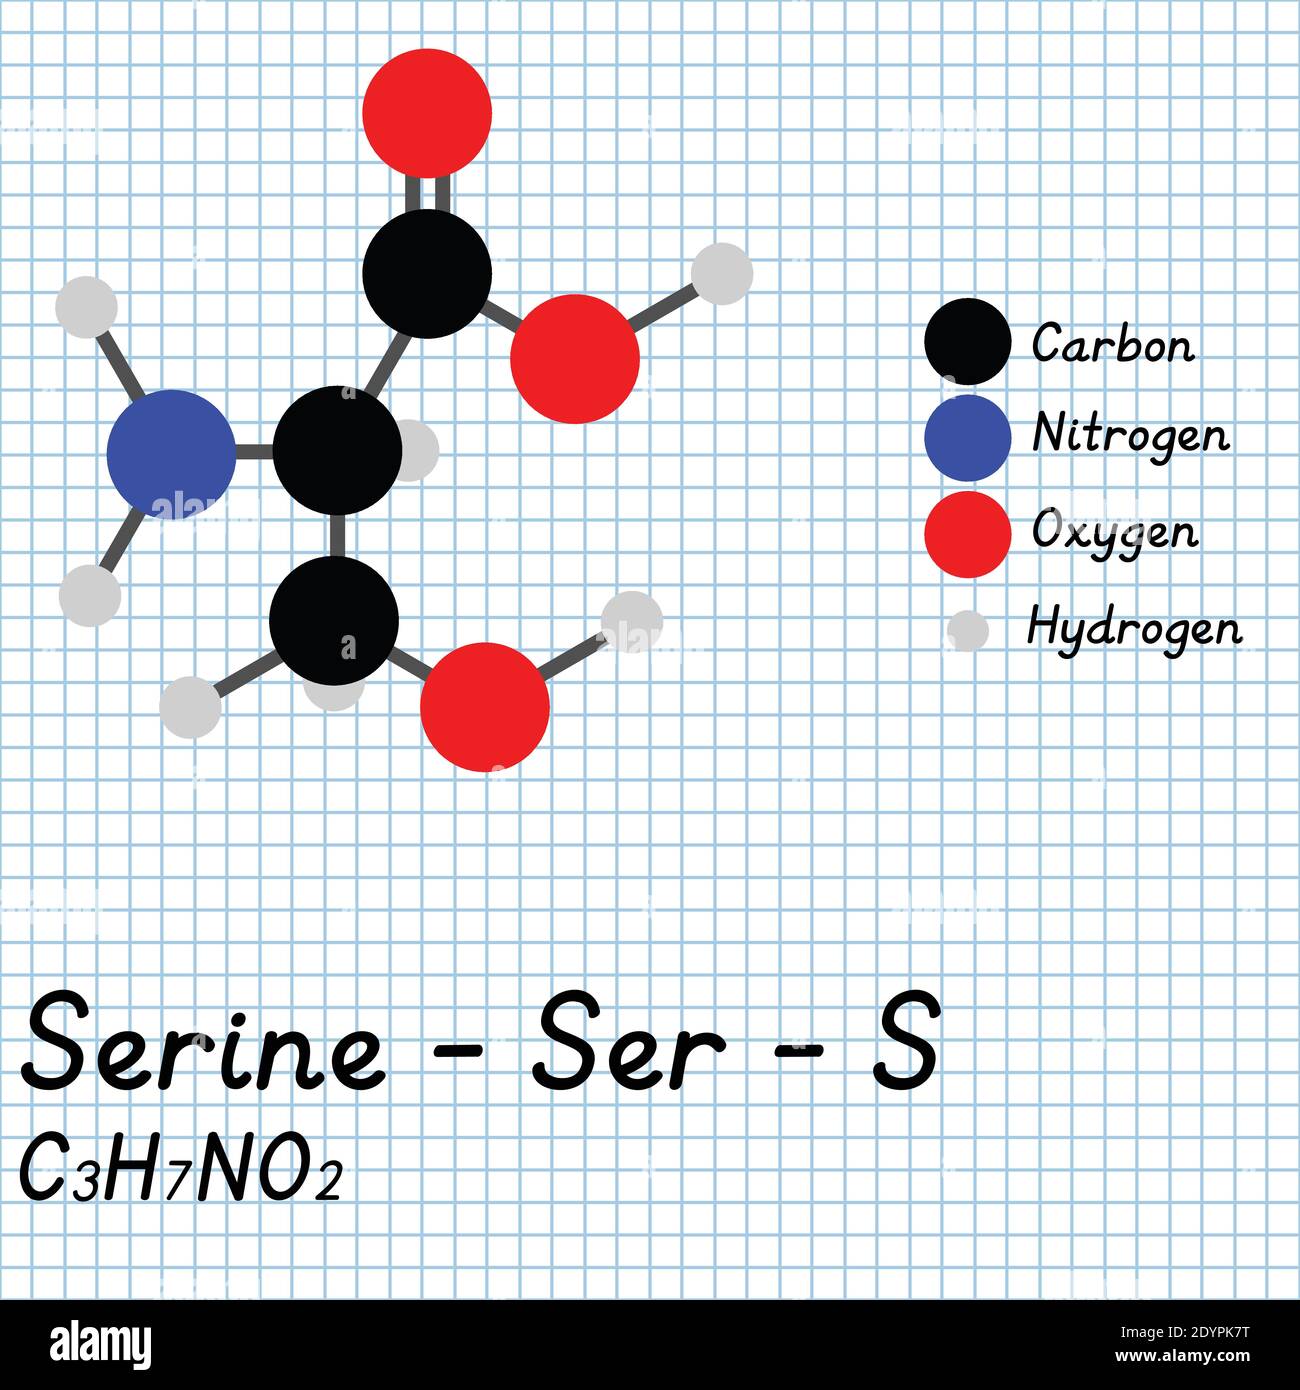 Serine - Ser - S Amino Acid molecular formula and chemical structure . 2D Ball and stick model on school paper sheet background. EPS10 Stock Vector